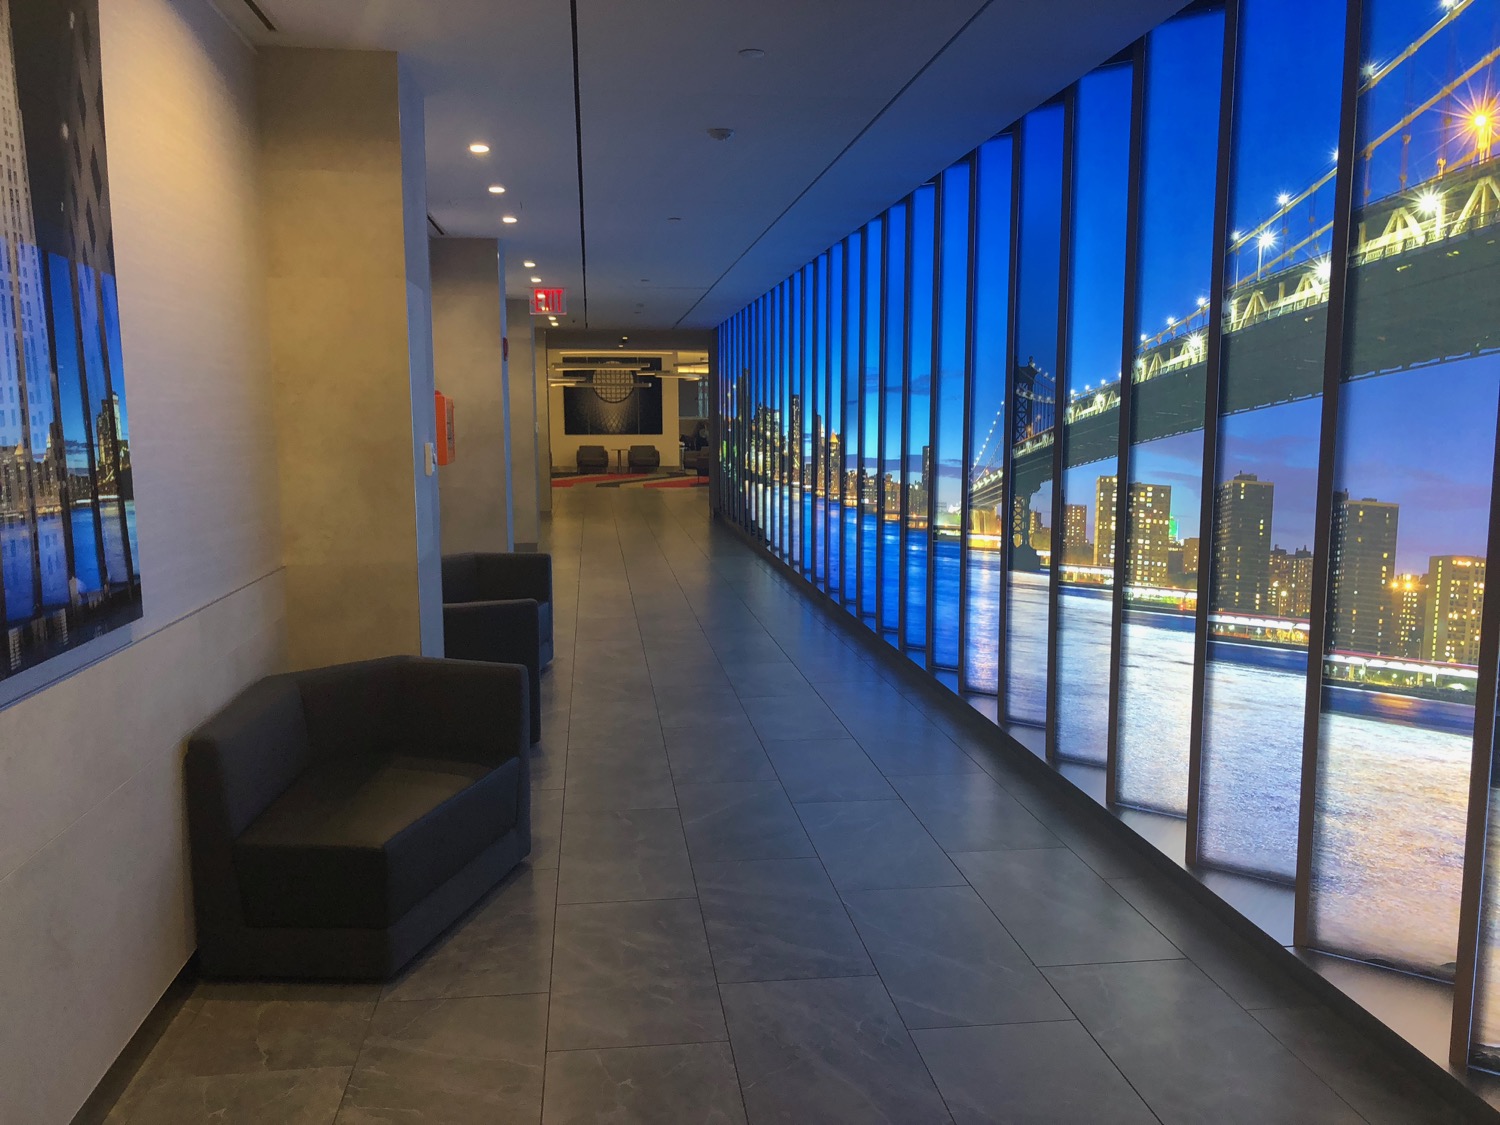 a long hallway with a view of a city and a bridge through windows